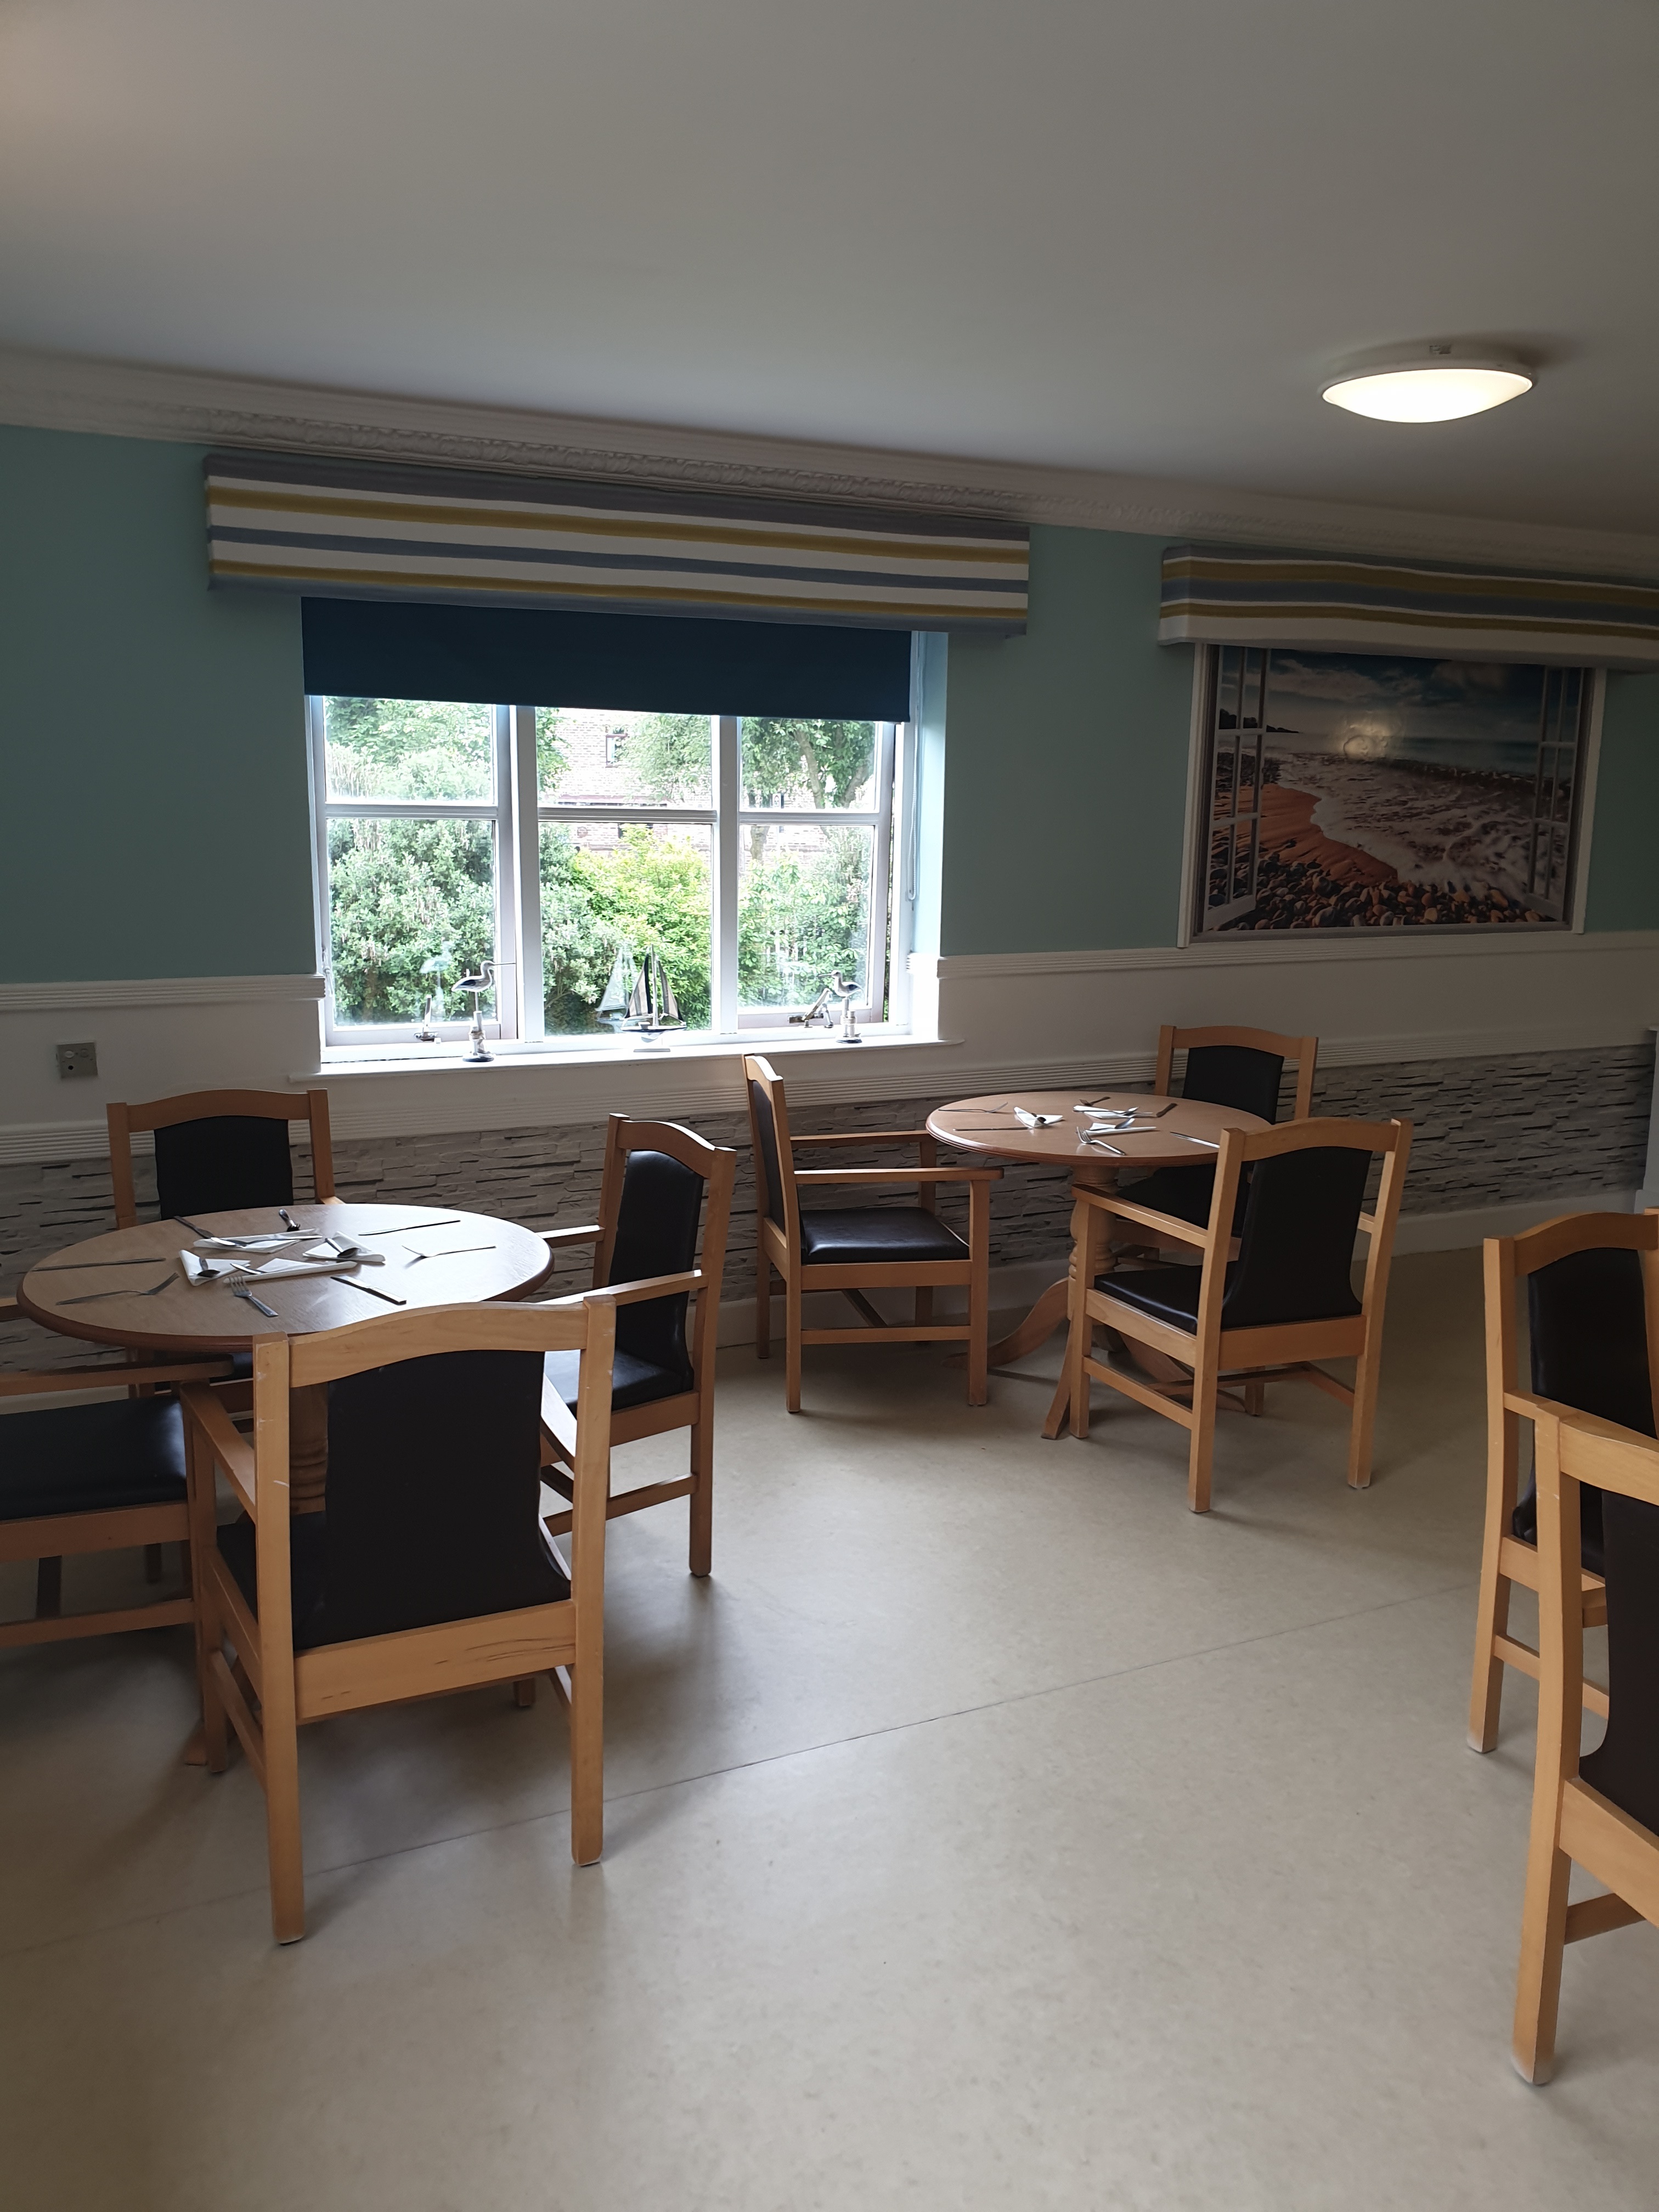 Dining Room: Key Healthcare is dedicated to caring for elderly residents in safe. We have multiple dementia care homes including our care home middlesbrough, our care home St. Helen and care home saltburn. We excel in monitoring and improving care levels.